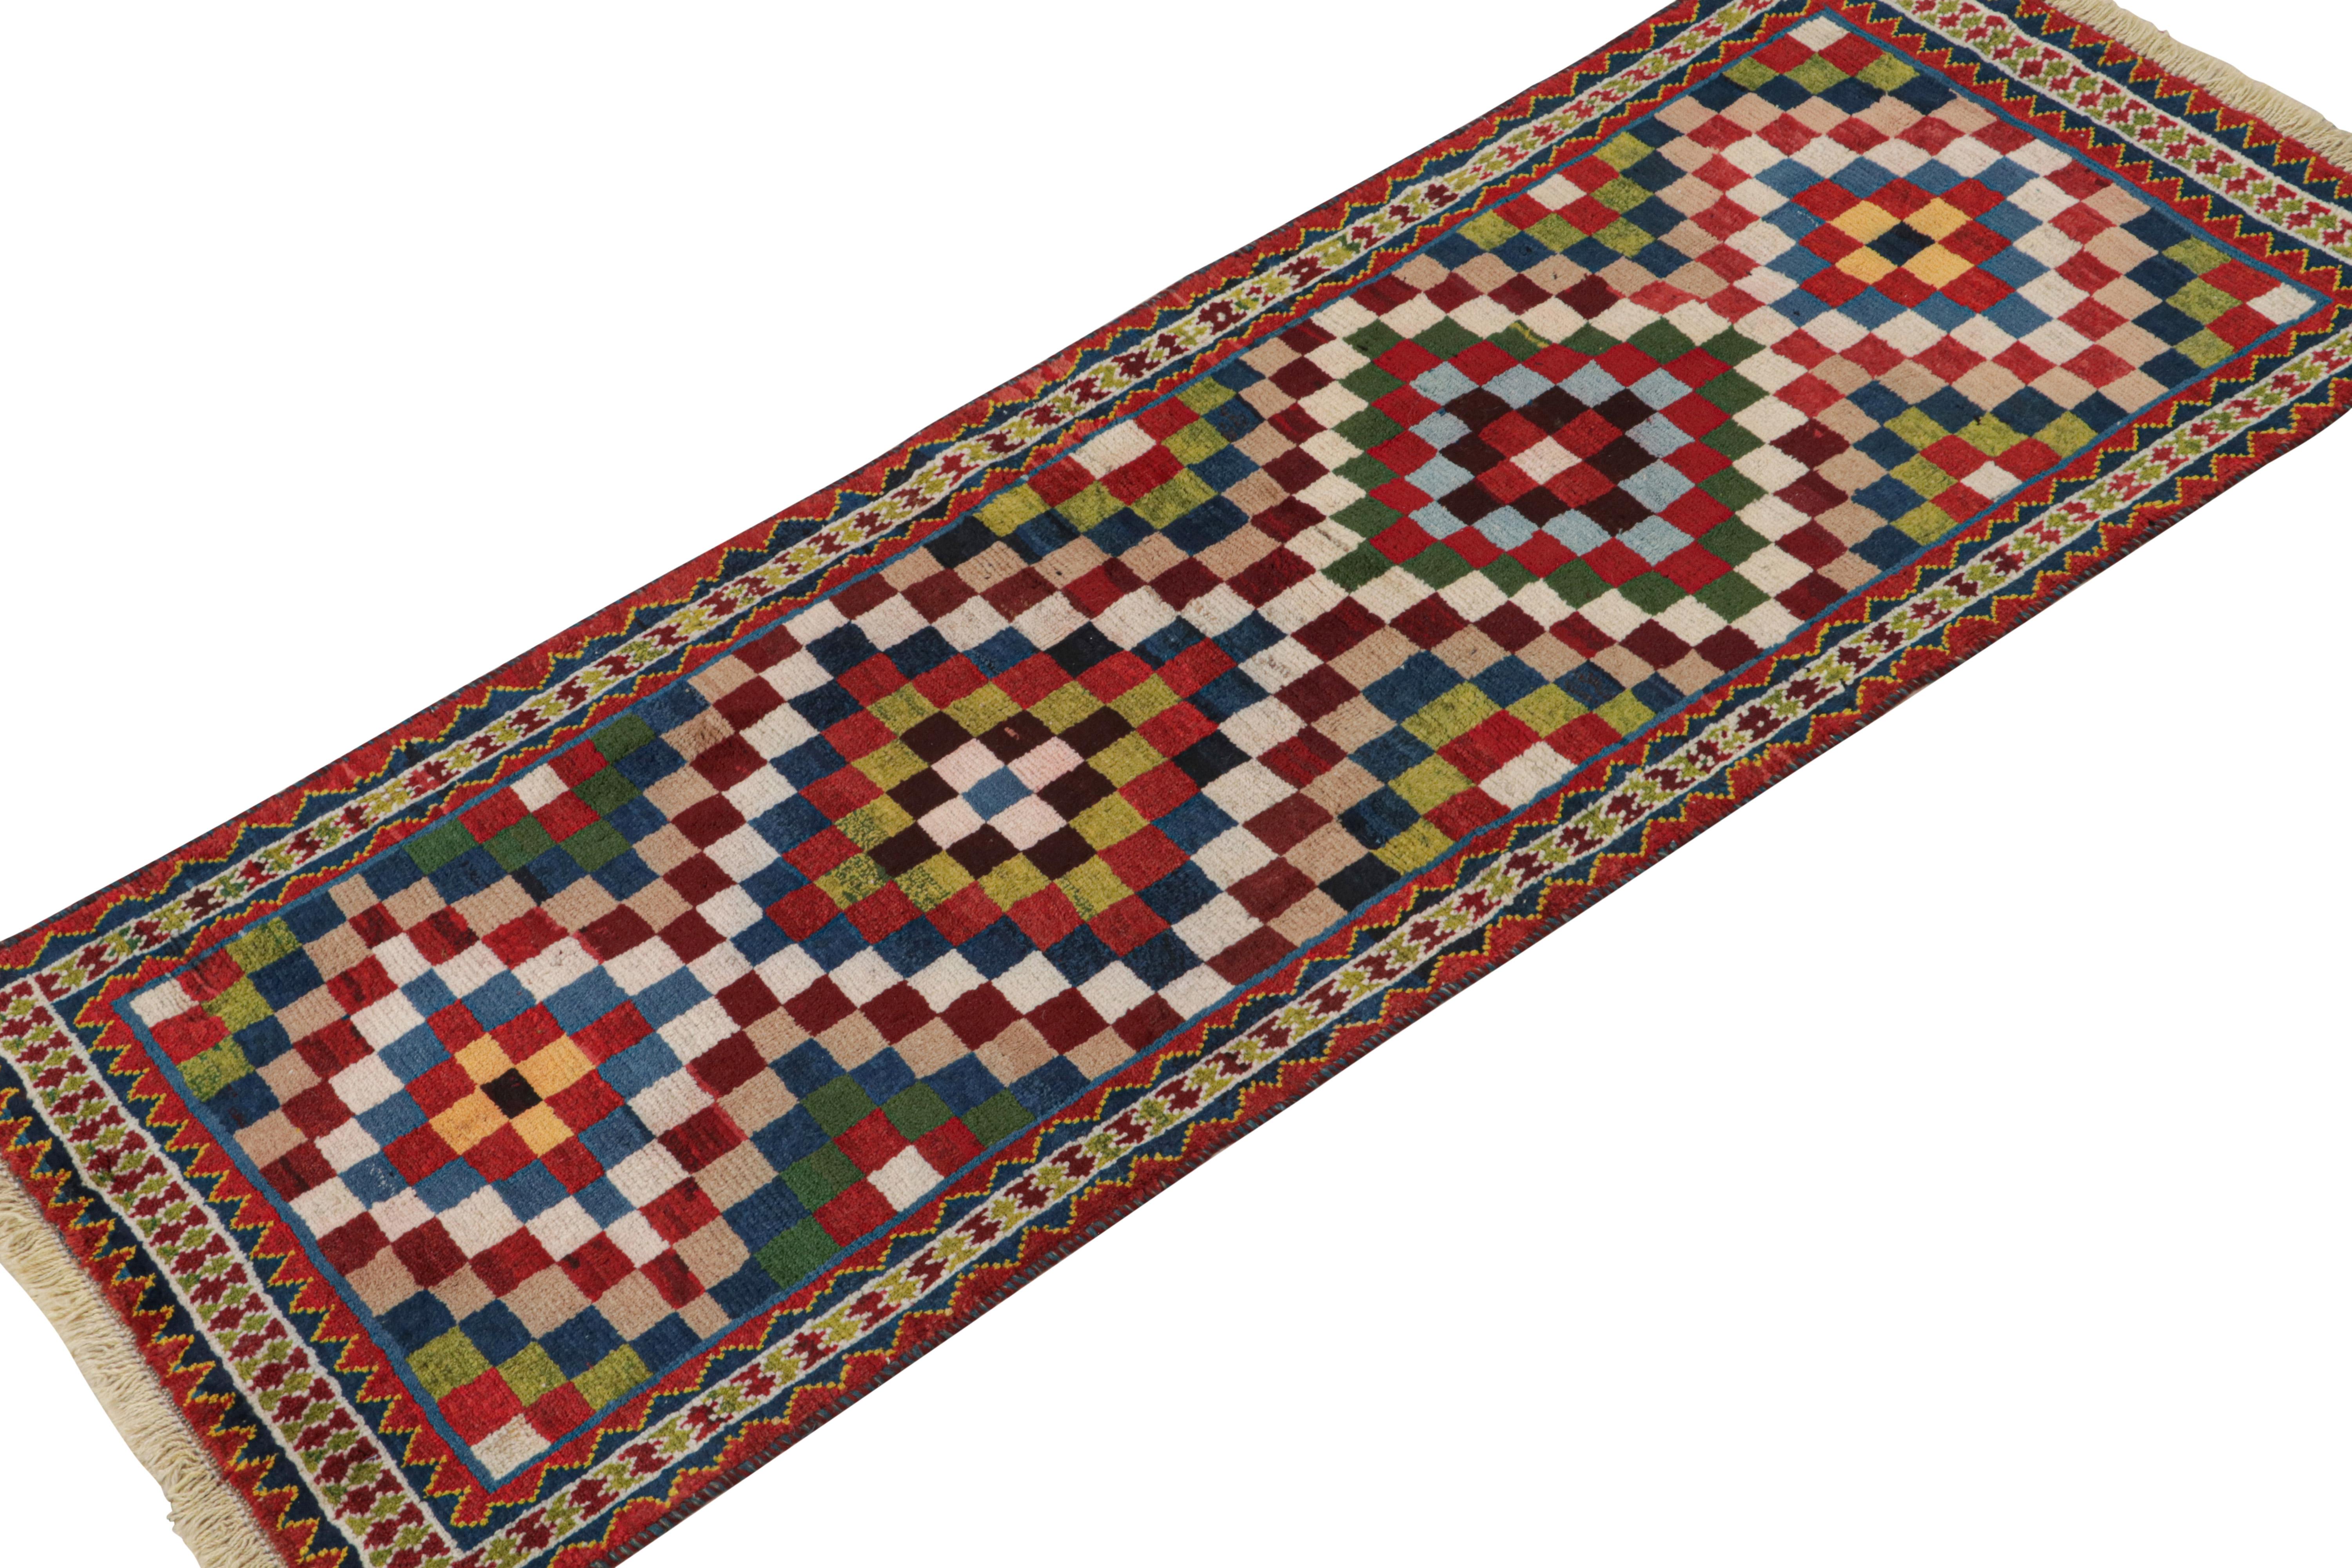 Tribal Vintage Qashqai Persian Gabbeh Runner with Geometric Patterns by Rug & Kilim For Sale